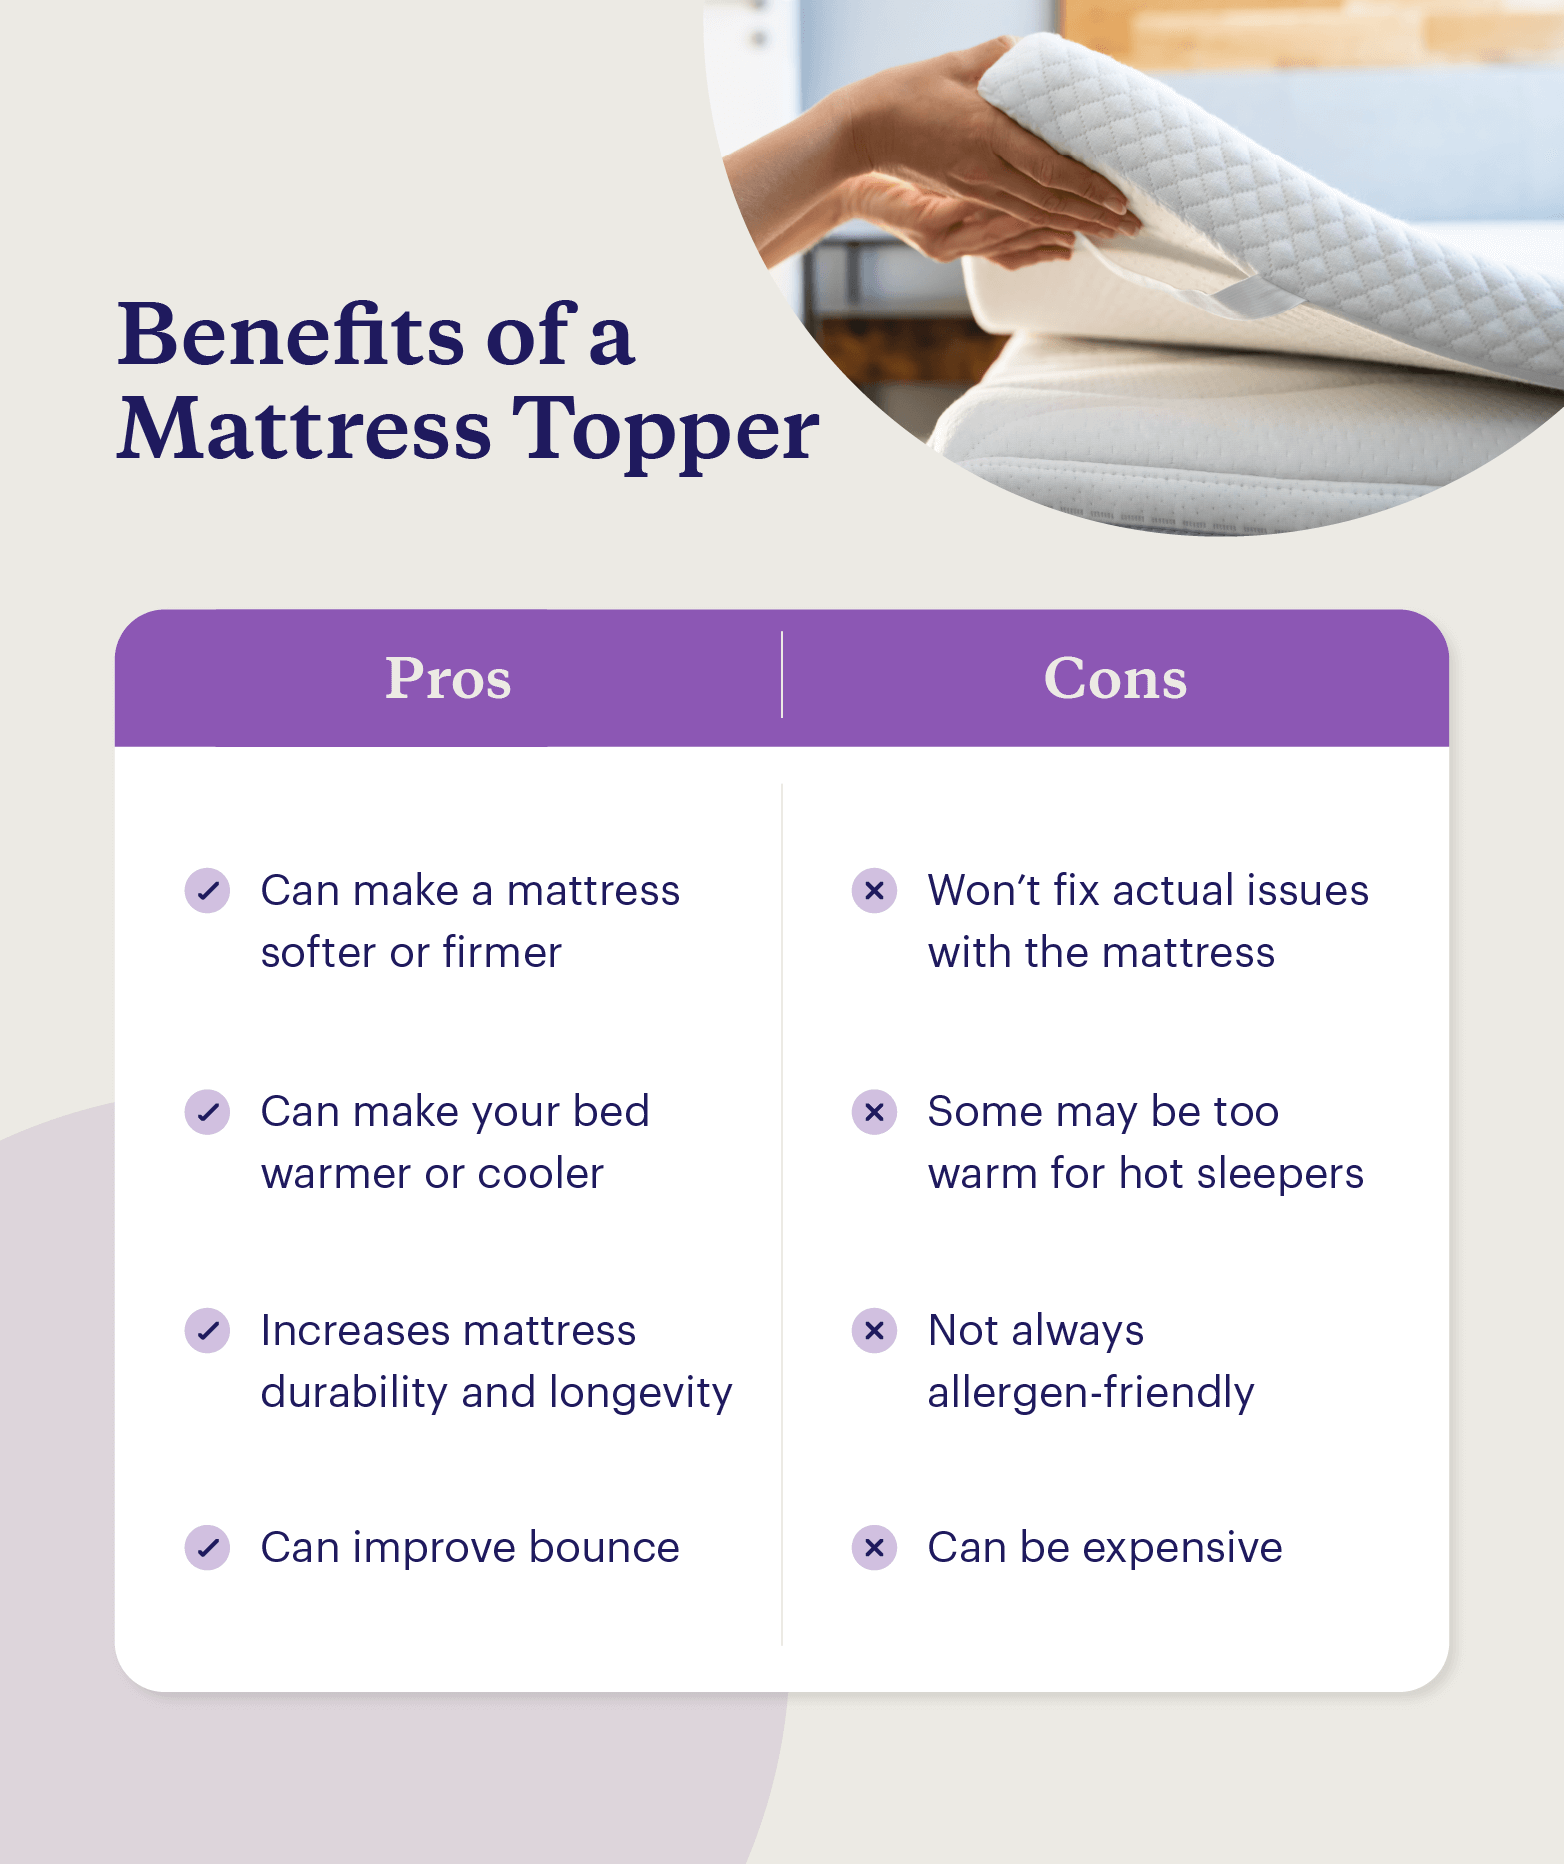 Graphic listing the pros and cons of mattress toppers.